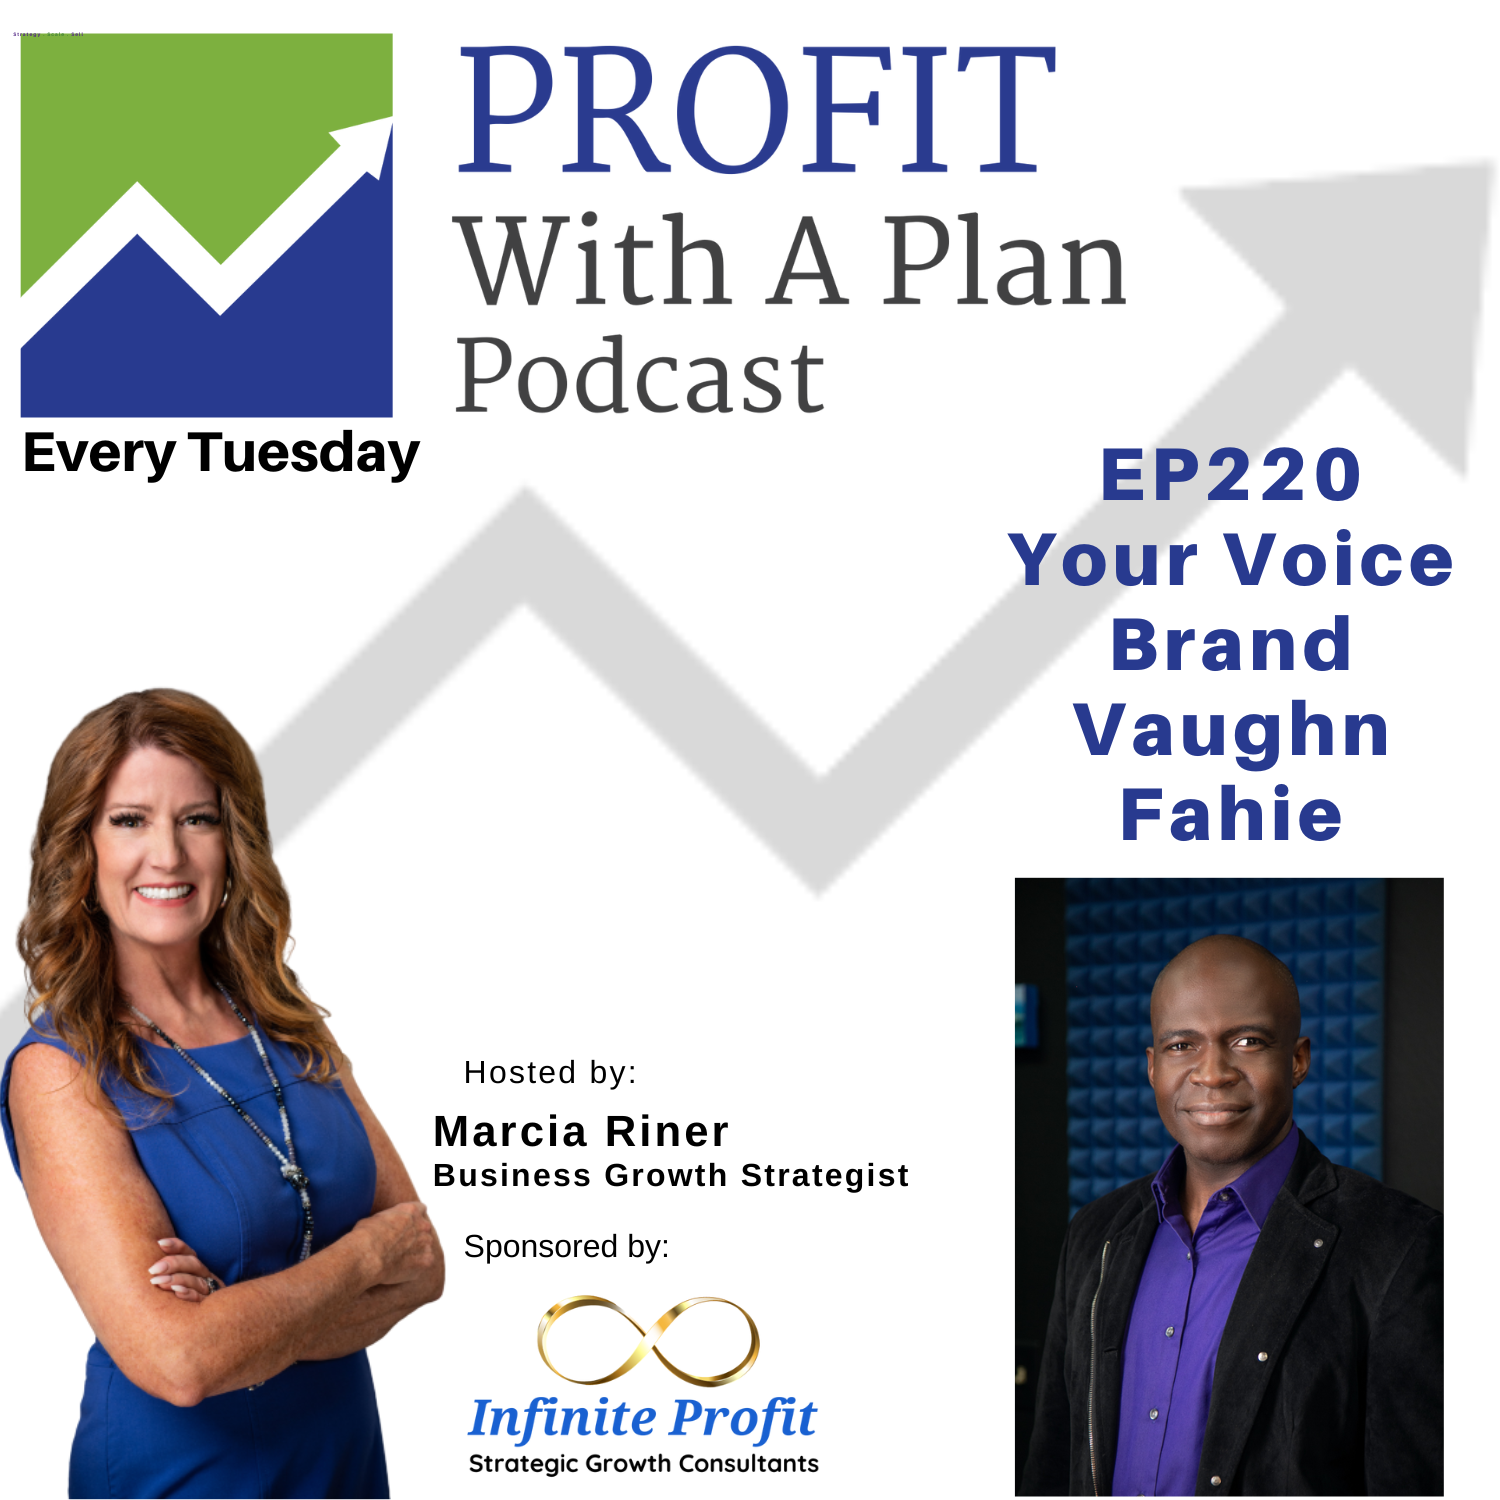 EP220- Your Voice Brand.- Vaughn Fahie